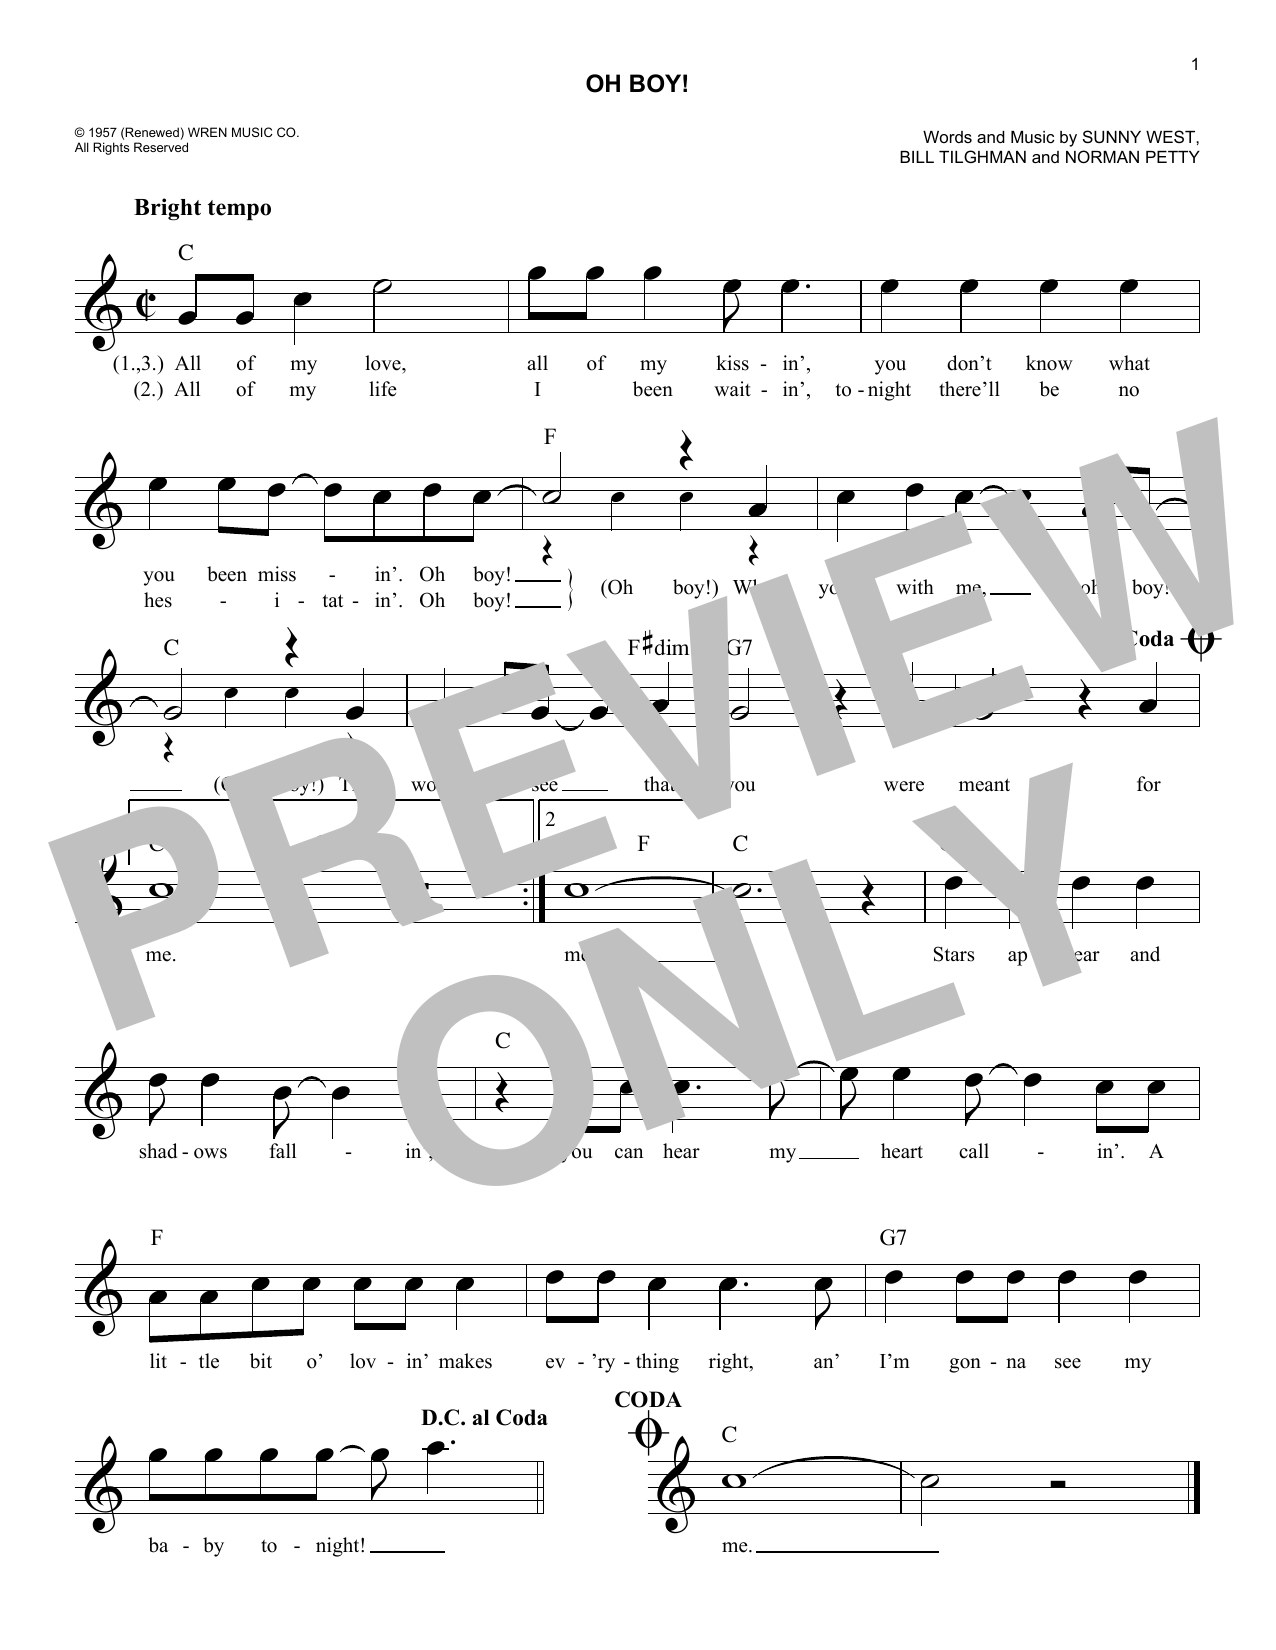 Download The Crickets Oh Boy! Sheet Music